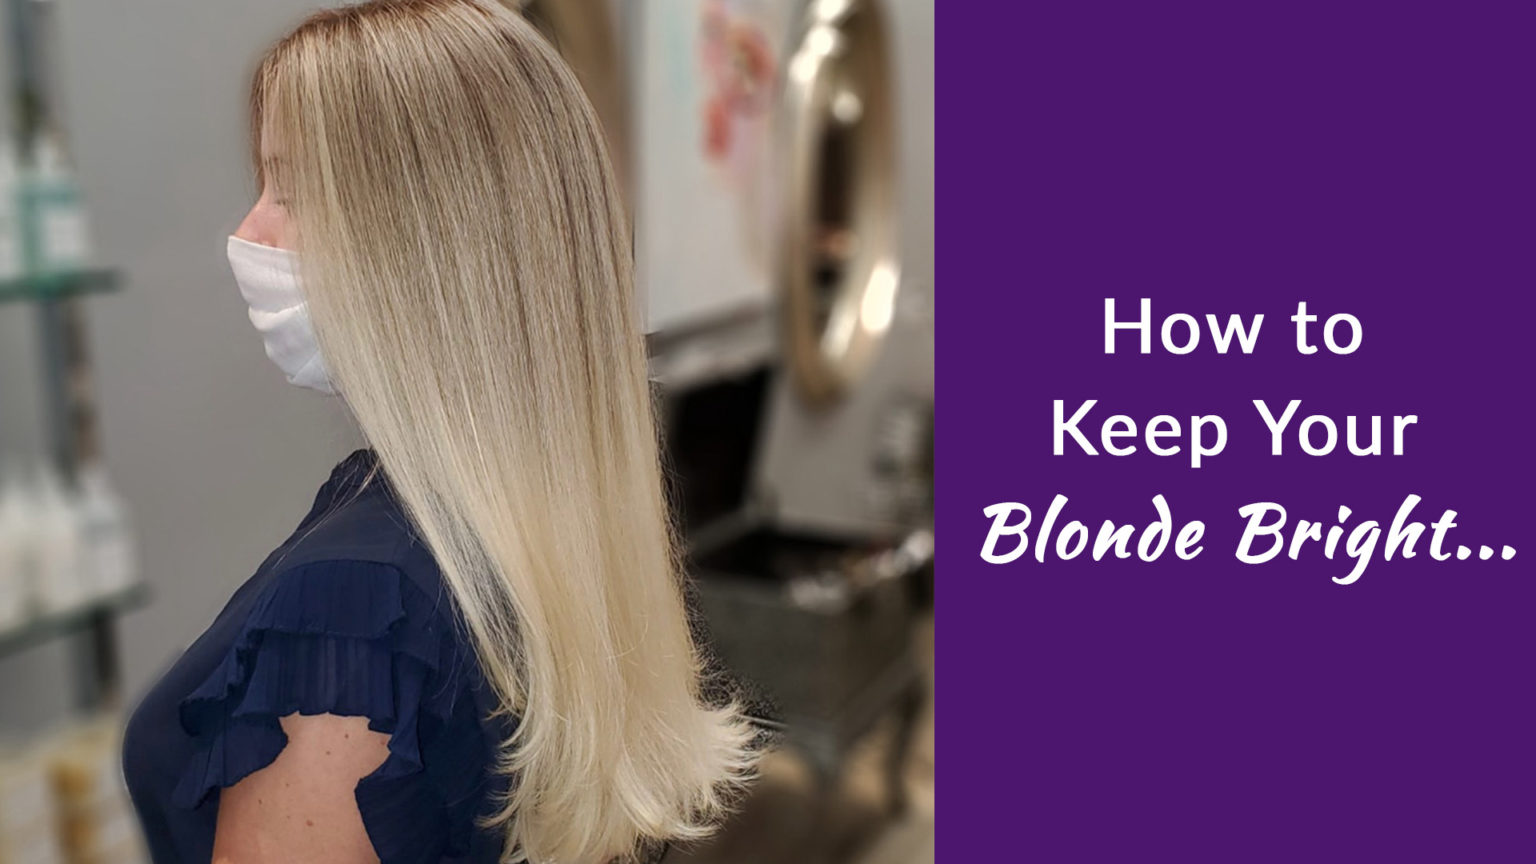 1. How to Achieve Light, Bright Blonde Hair - wide 5